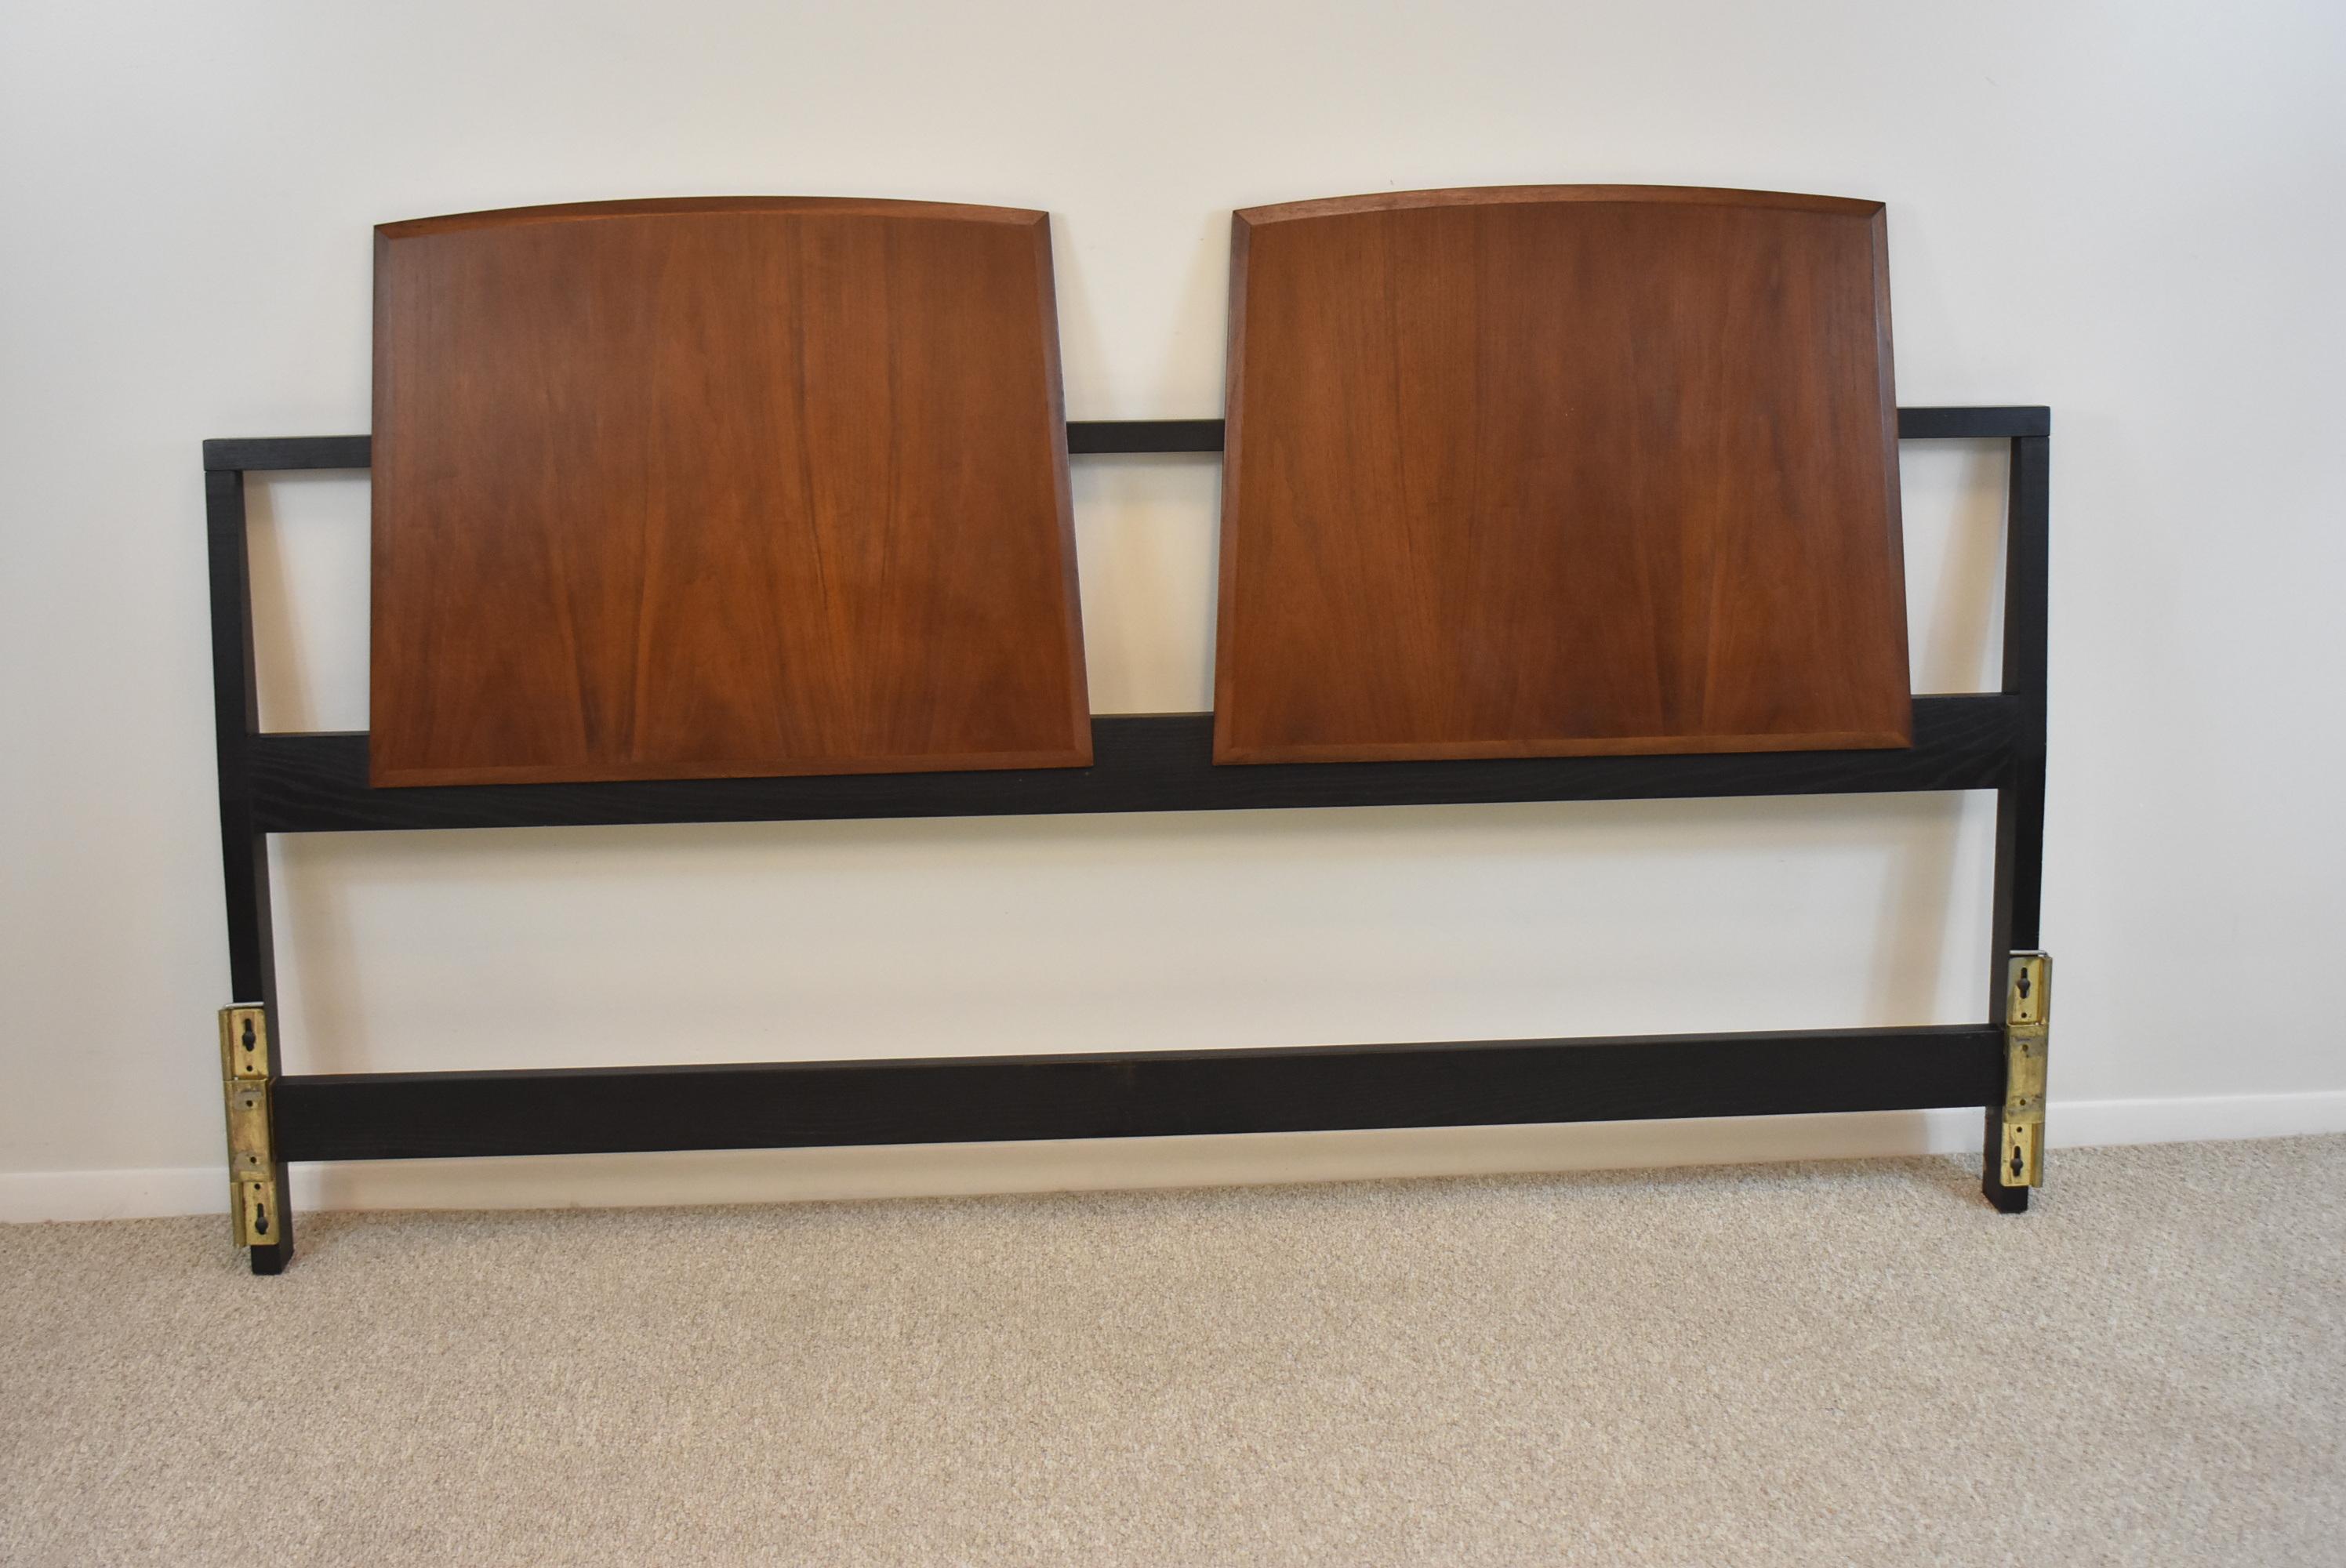 Mid Century Modern walnut and ebonized wood king size headboard by Milo Baughman. Fitted brackets for a steel bed frame. Very nice condition. Dimensions: 3